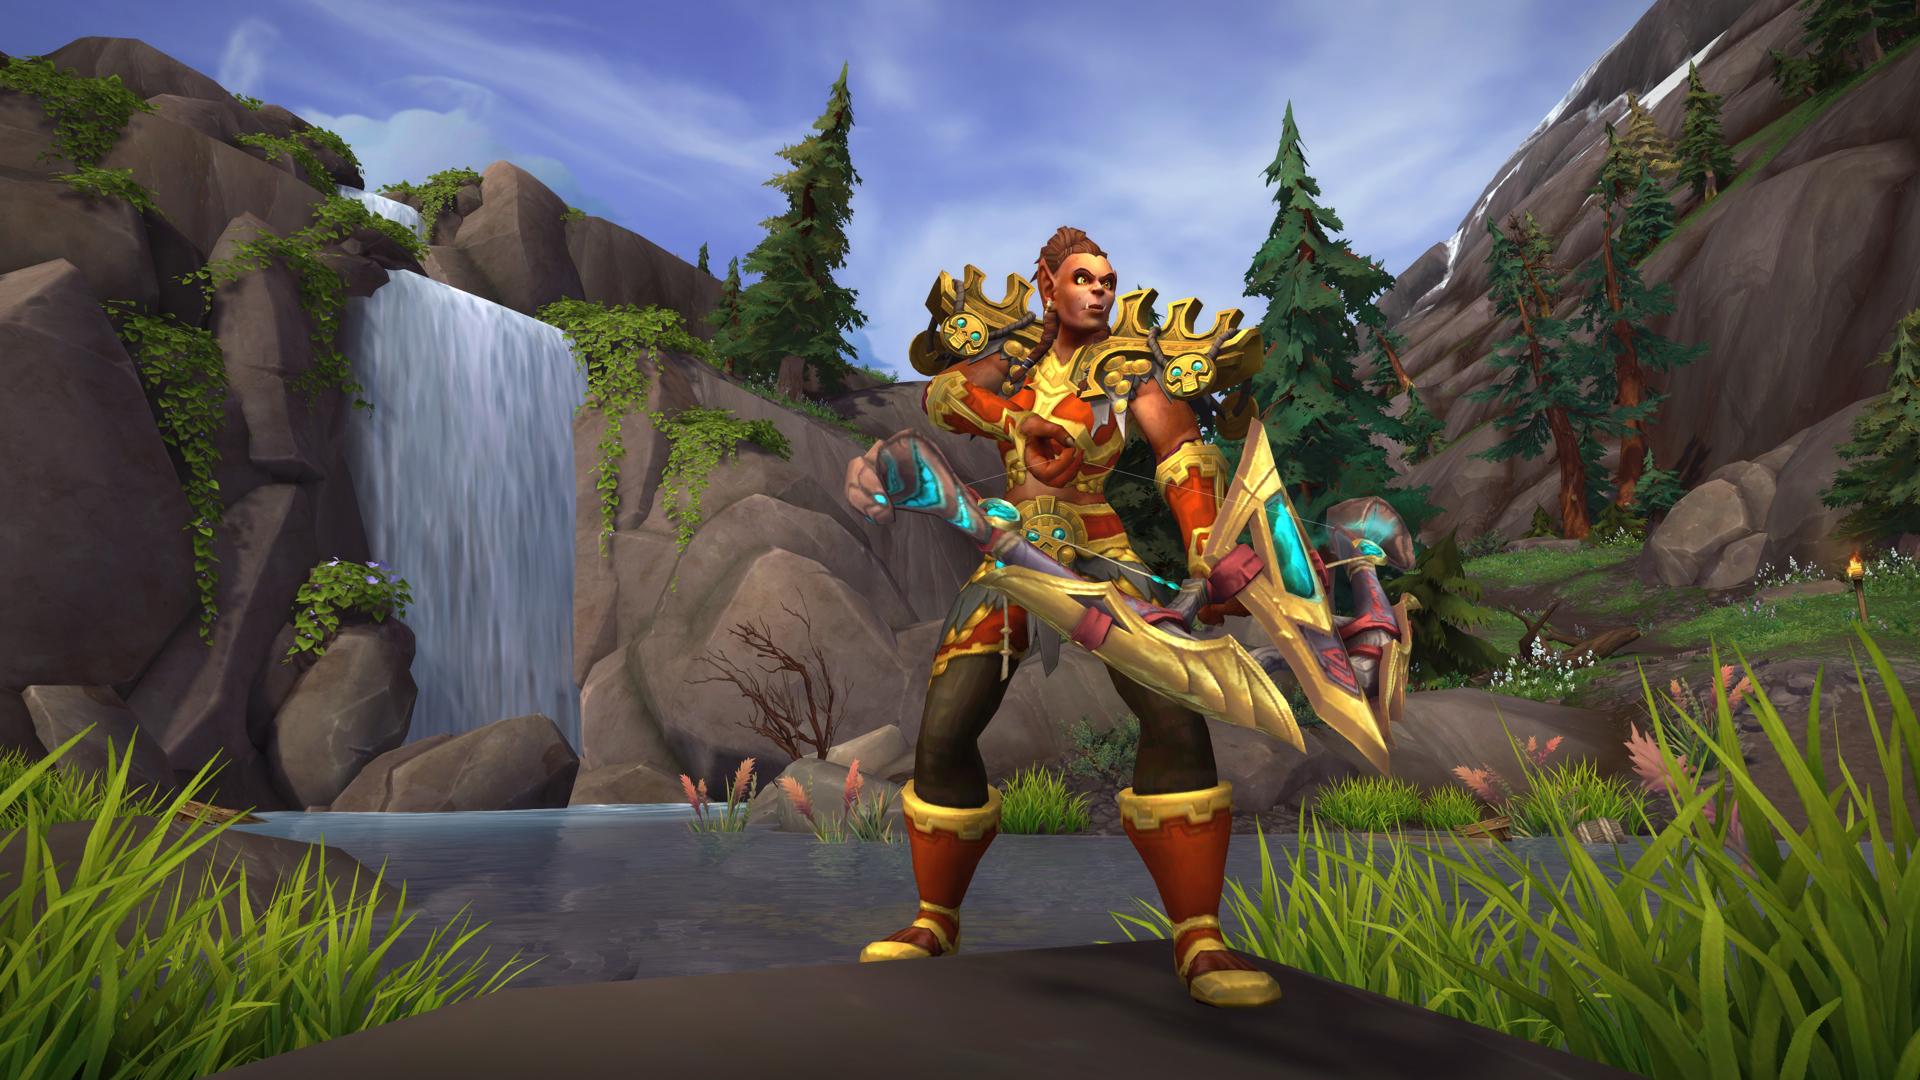 Battle for Azeroth Review: An Explosive Start That Fizzles | Digital Trends